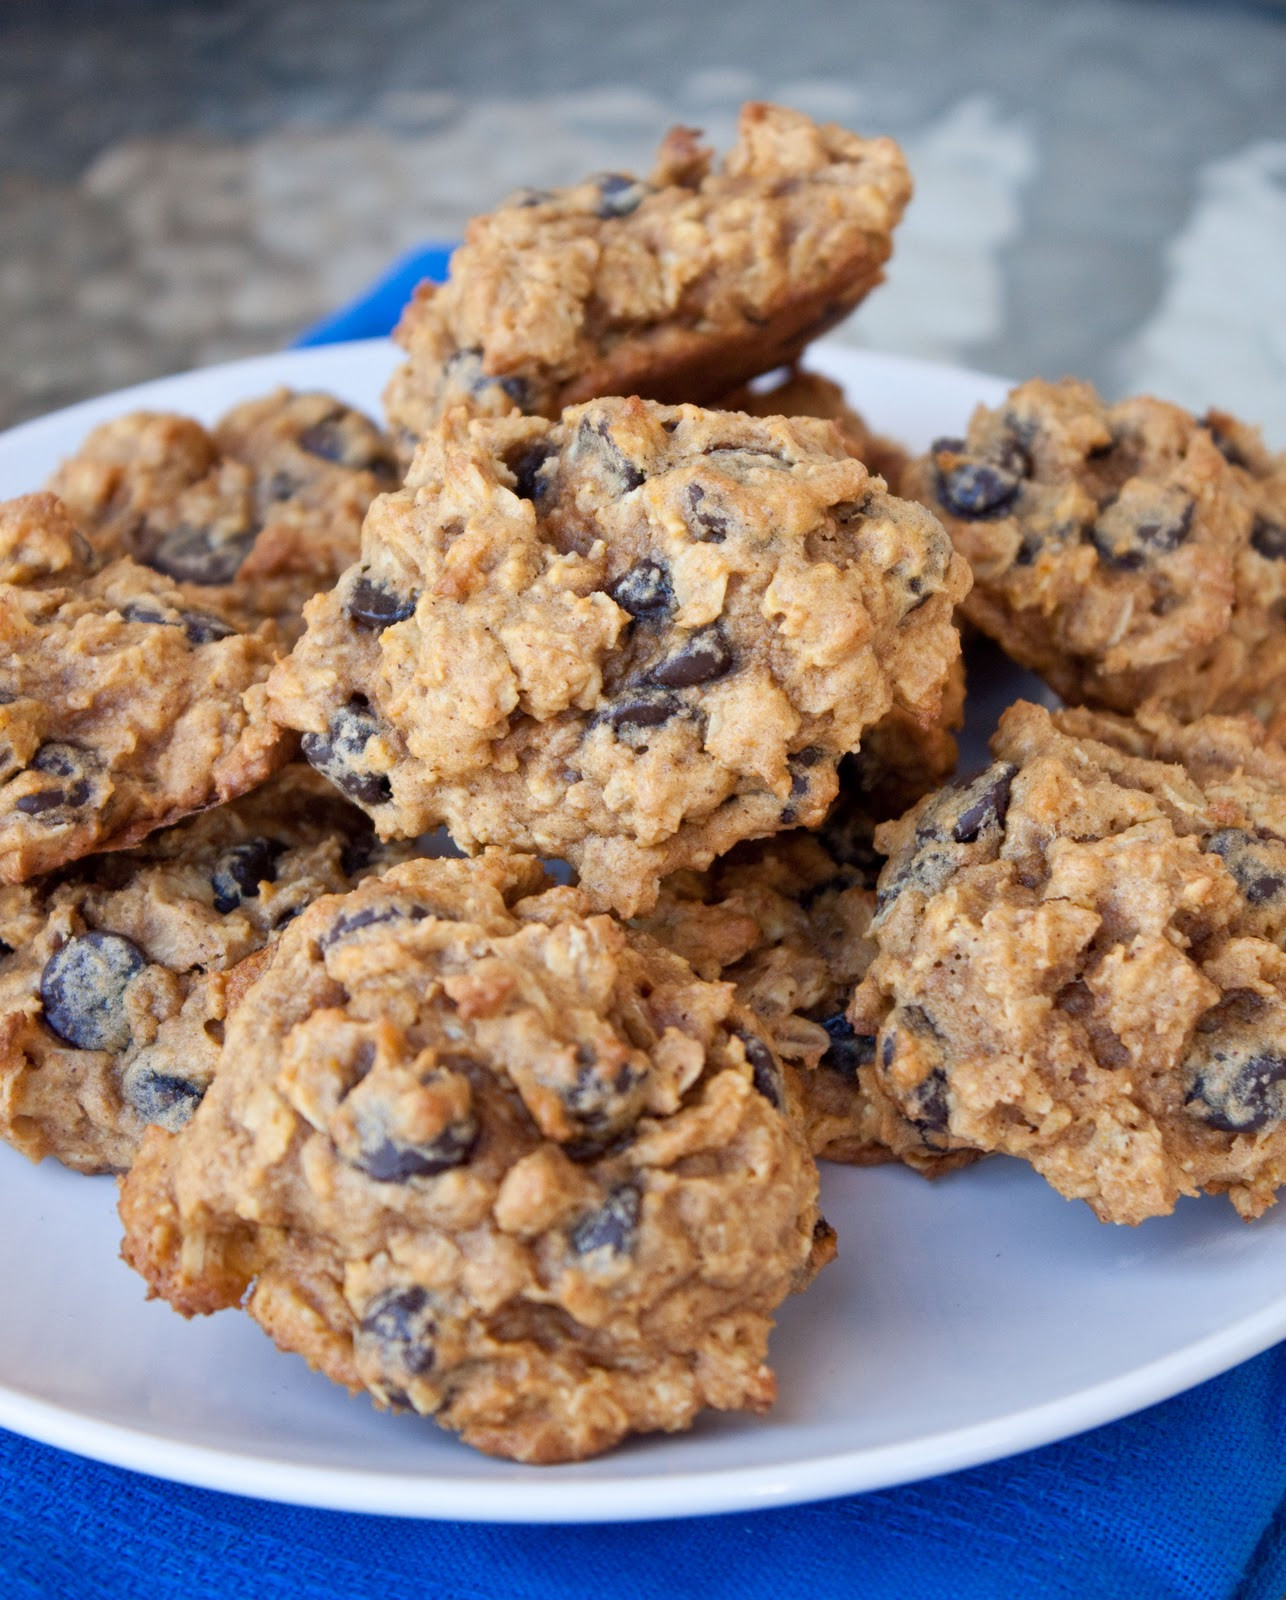 Healthy Chocolate Chip Cookies Recipe
 healthy chocolate chip cookie recipes